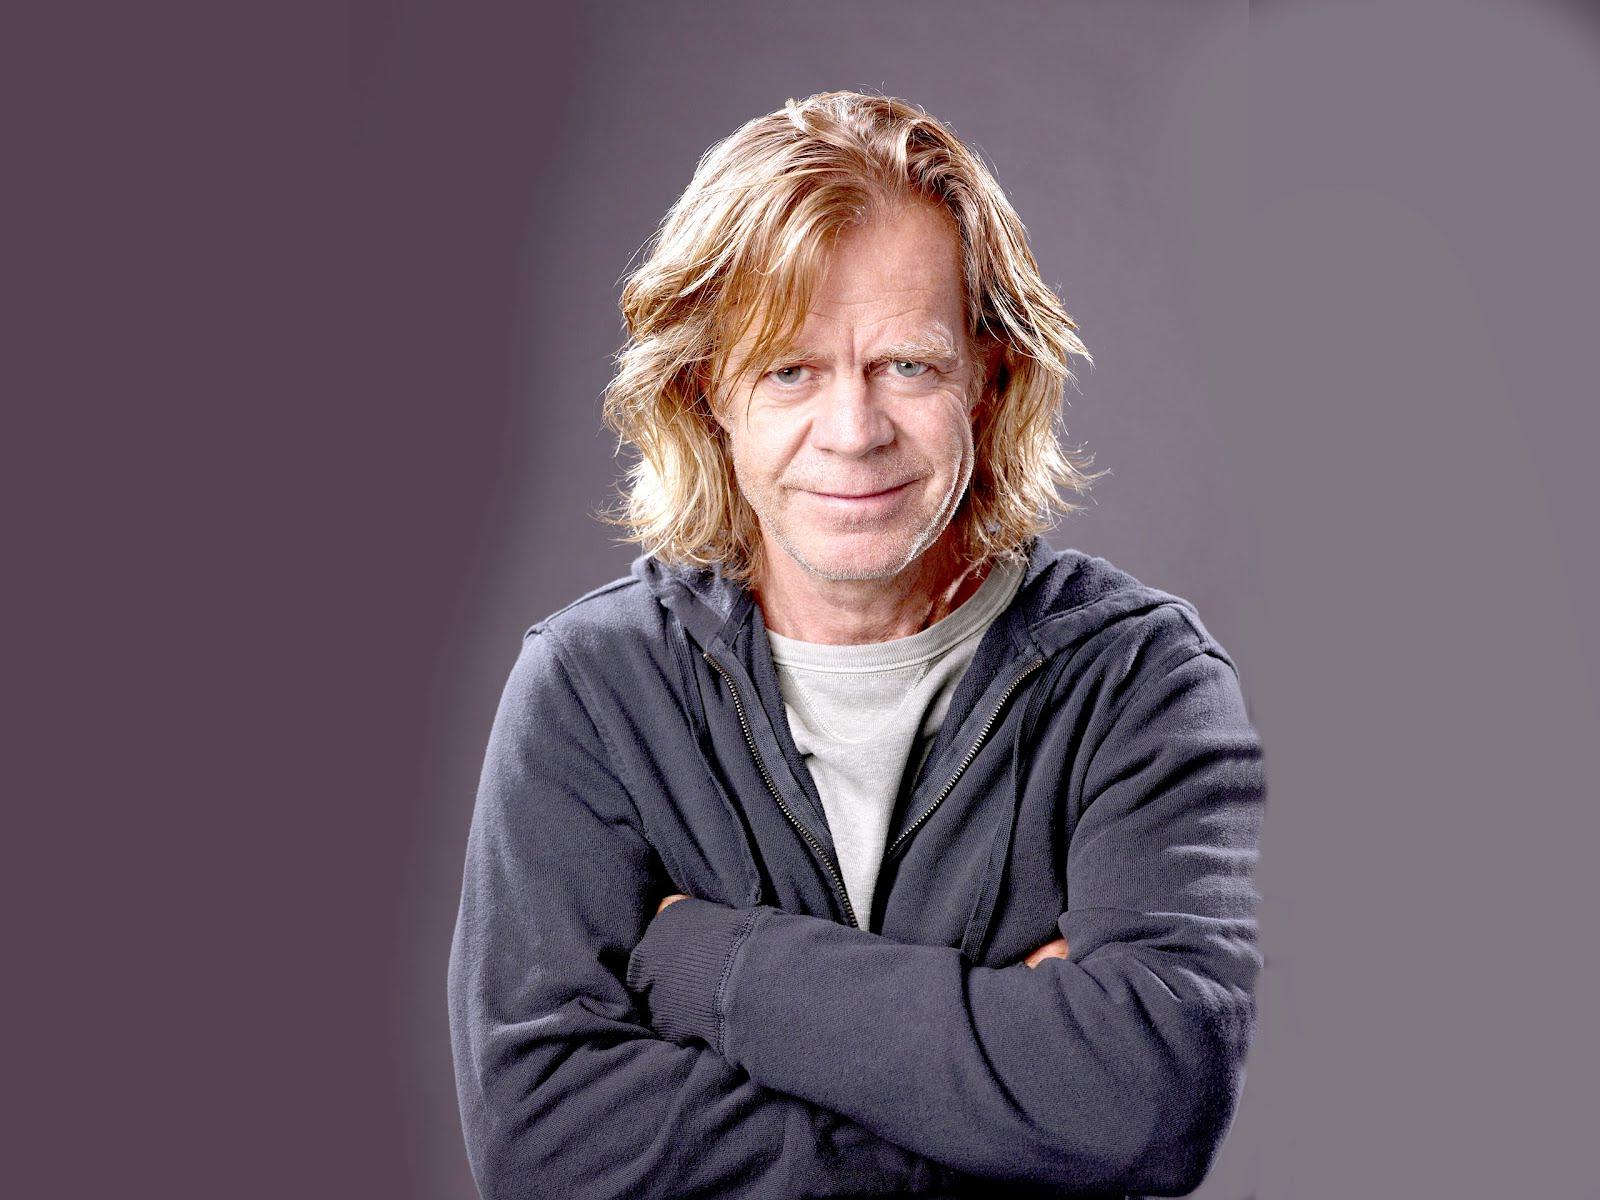 Wallpaper Collections: william h. macy wallpaper